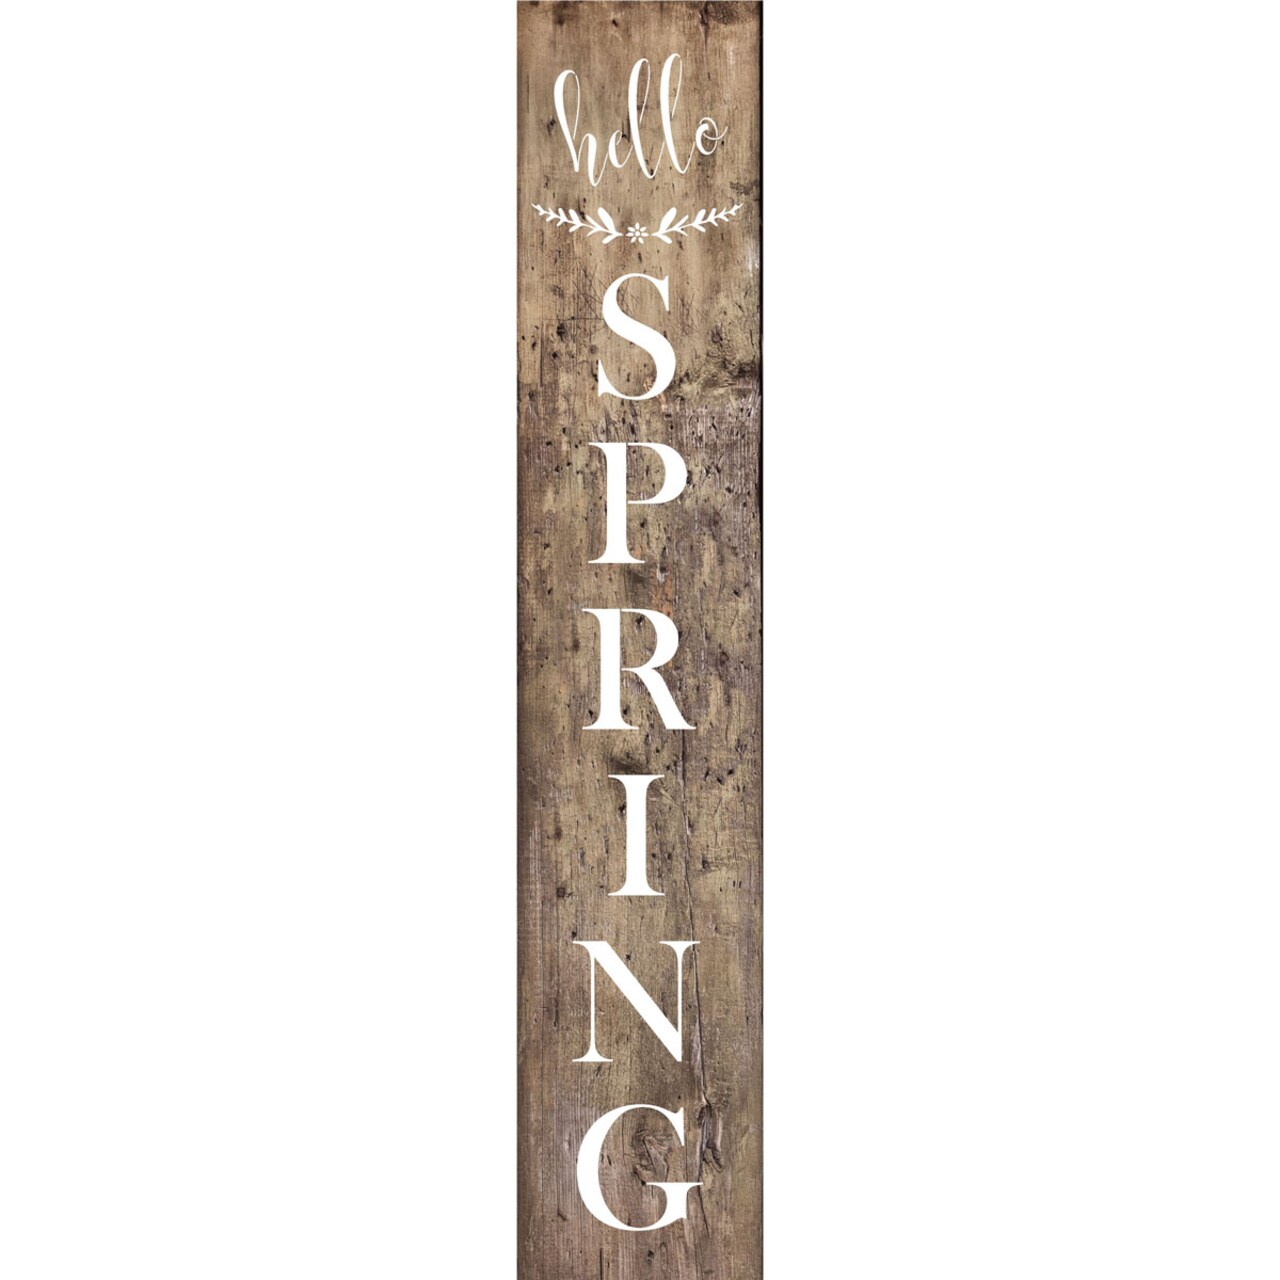 60-Inch Hello Spring Wall Stencil | 3815L by Designer Stencils | Word &#x26; Phrase Stencils | Reusable Art Craft Stencils for Painting on Walls, Canvas, Wood | Reusable Plastic Paint Stencil for Home Makeover | Easy to Use &#x26; Clean Art Stencil